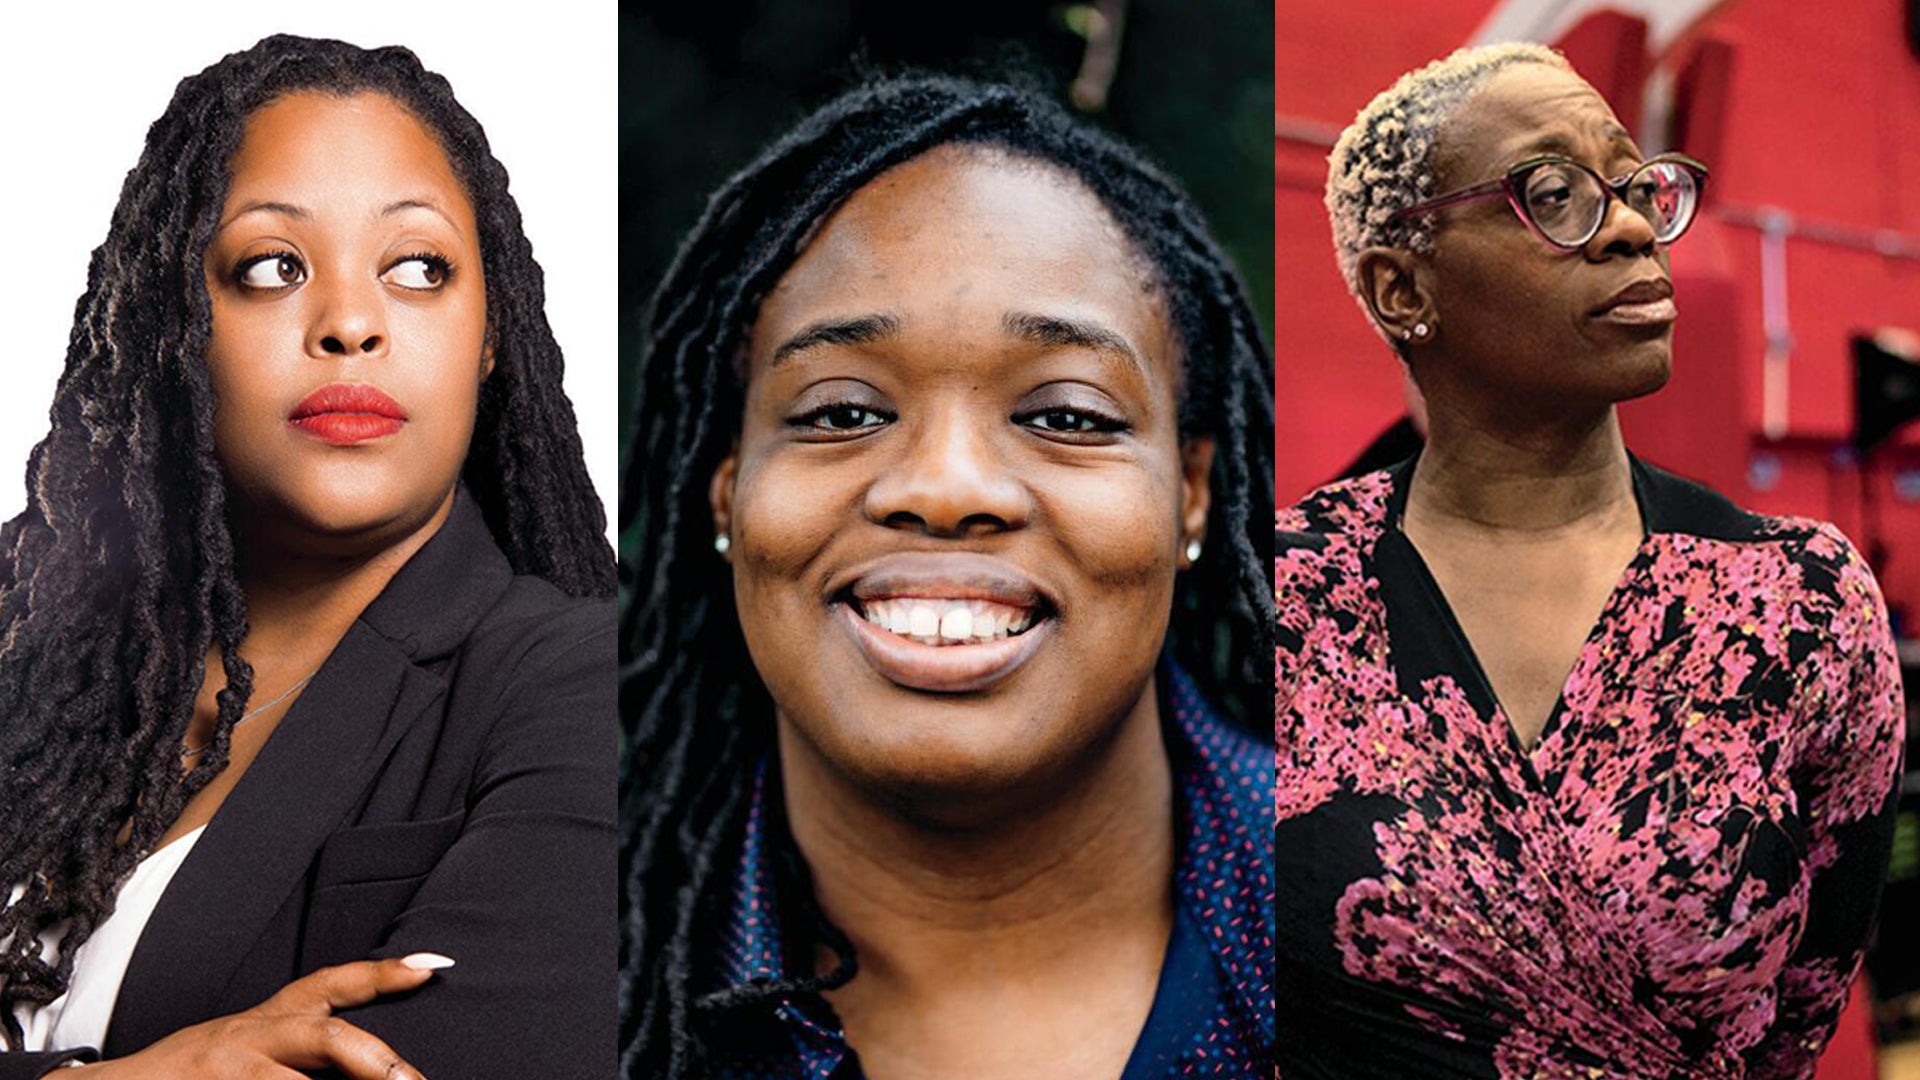 Putting "People Over Profits": Meet 3 Black Women Aiming for Progress in Congress